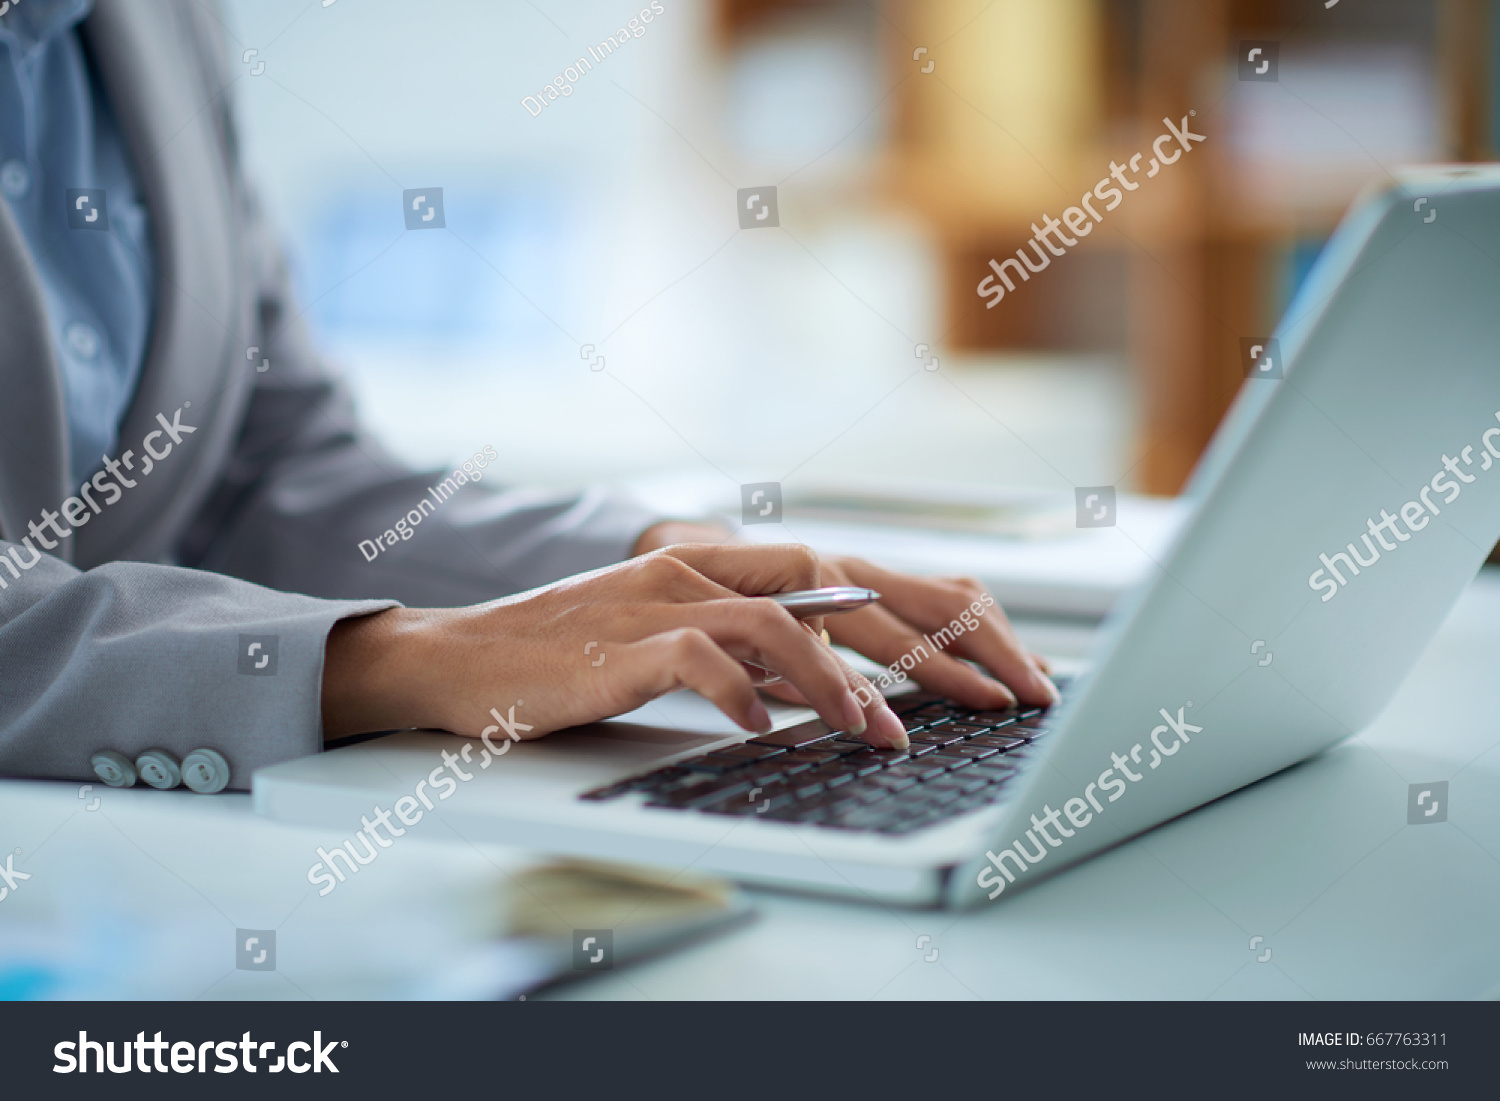 Hands Business Lady Working On Laptop Stock Photo Edit Now 667763311